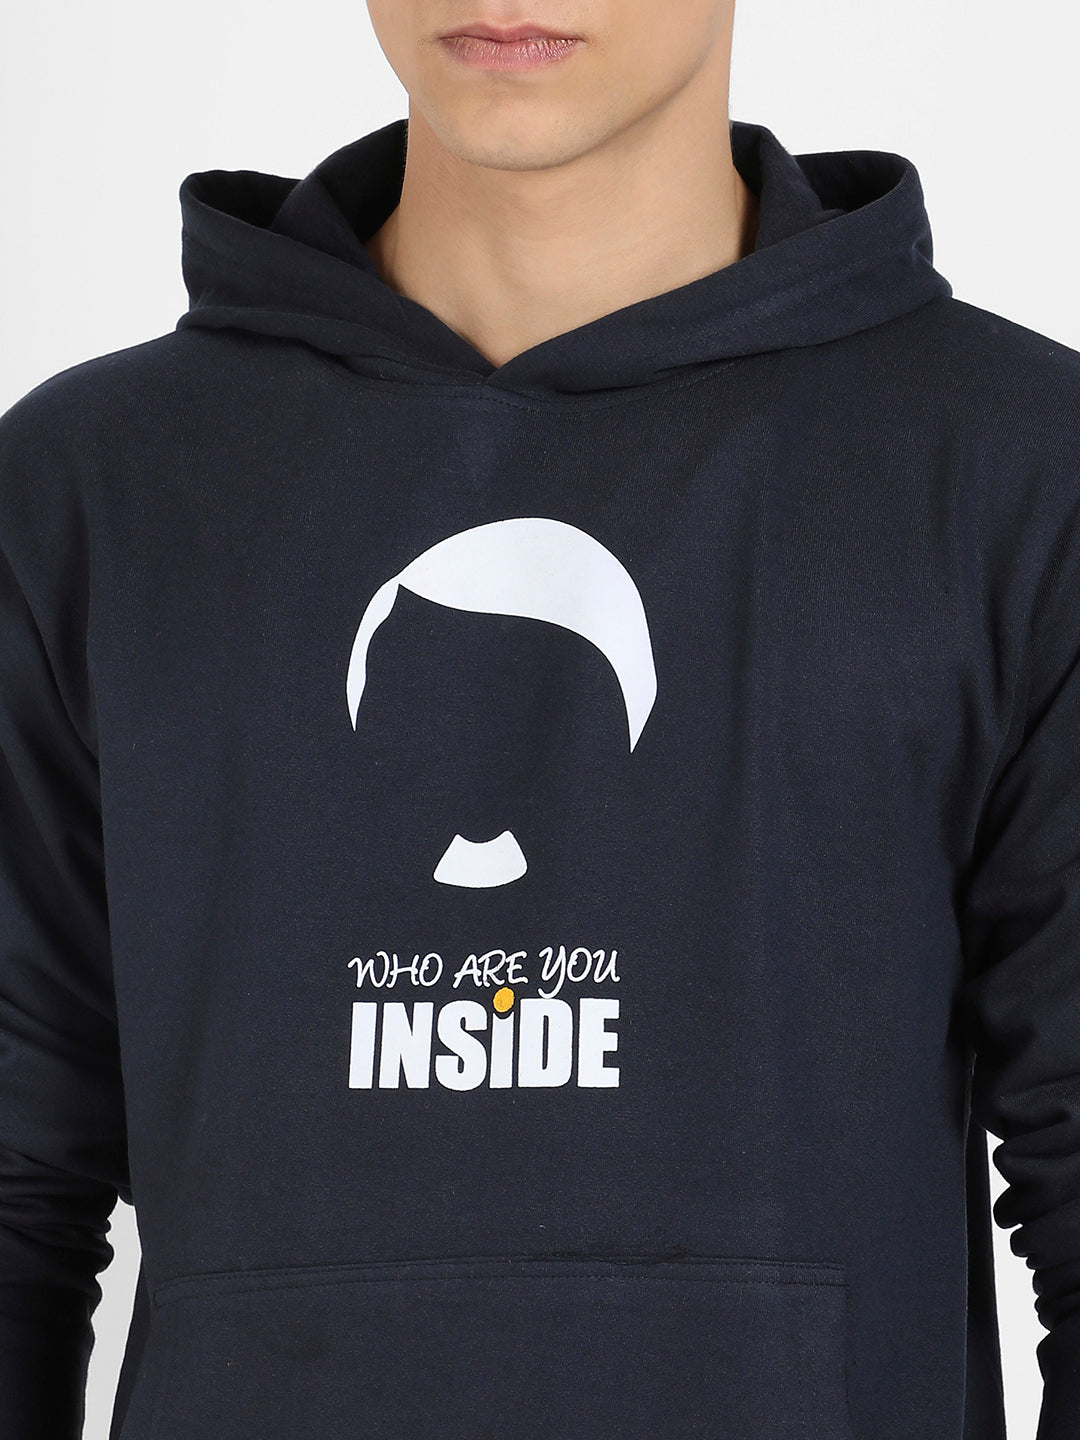 Men's Navy Blue Who Are You Inside Hoodie With Kangaroo Pocket